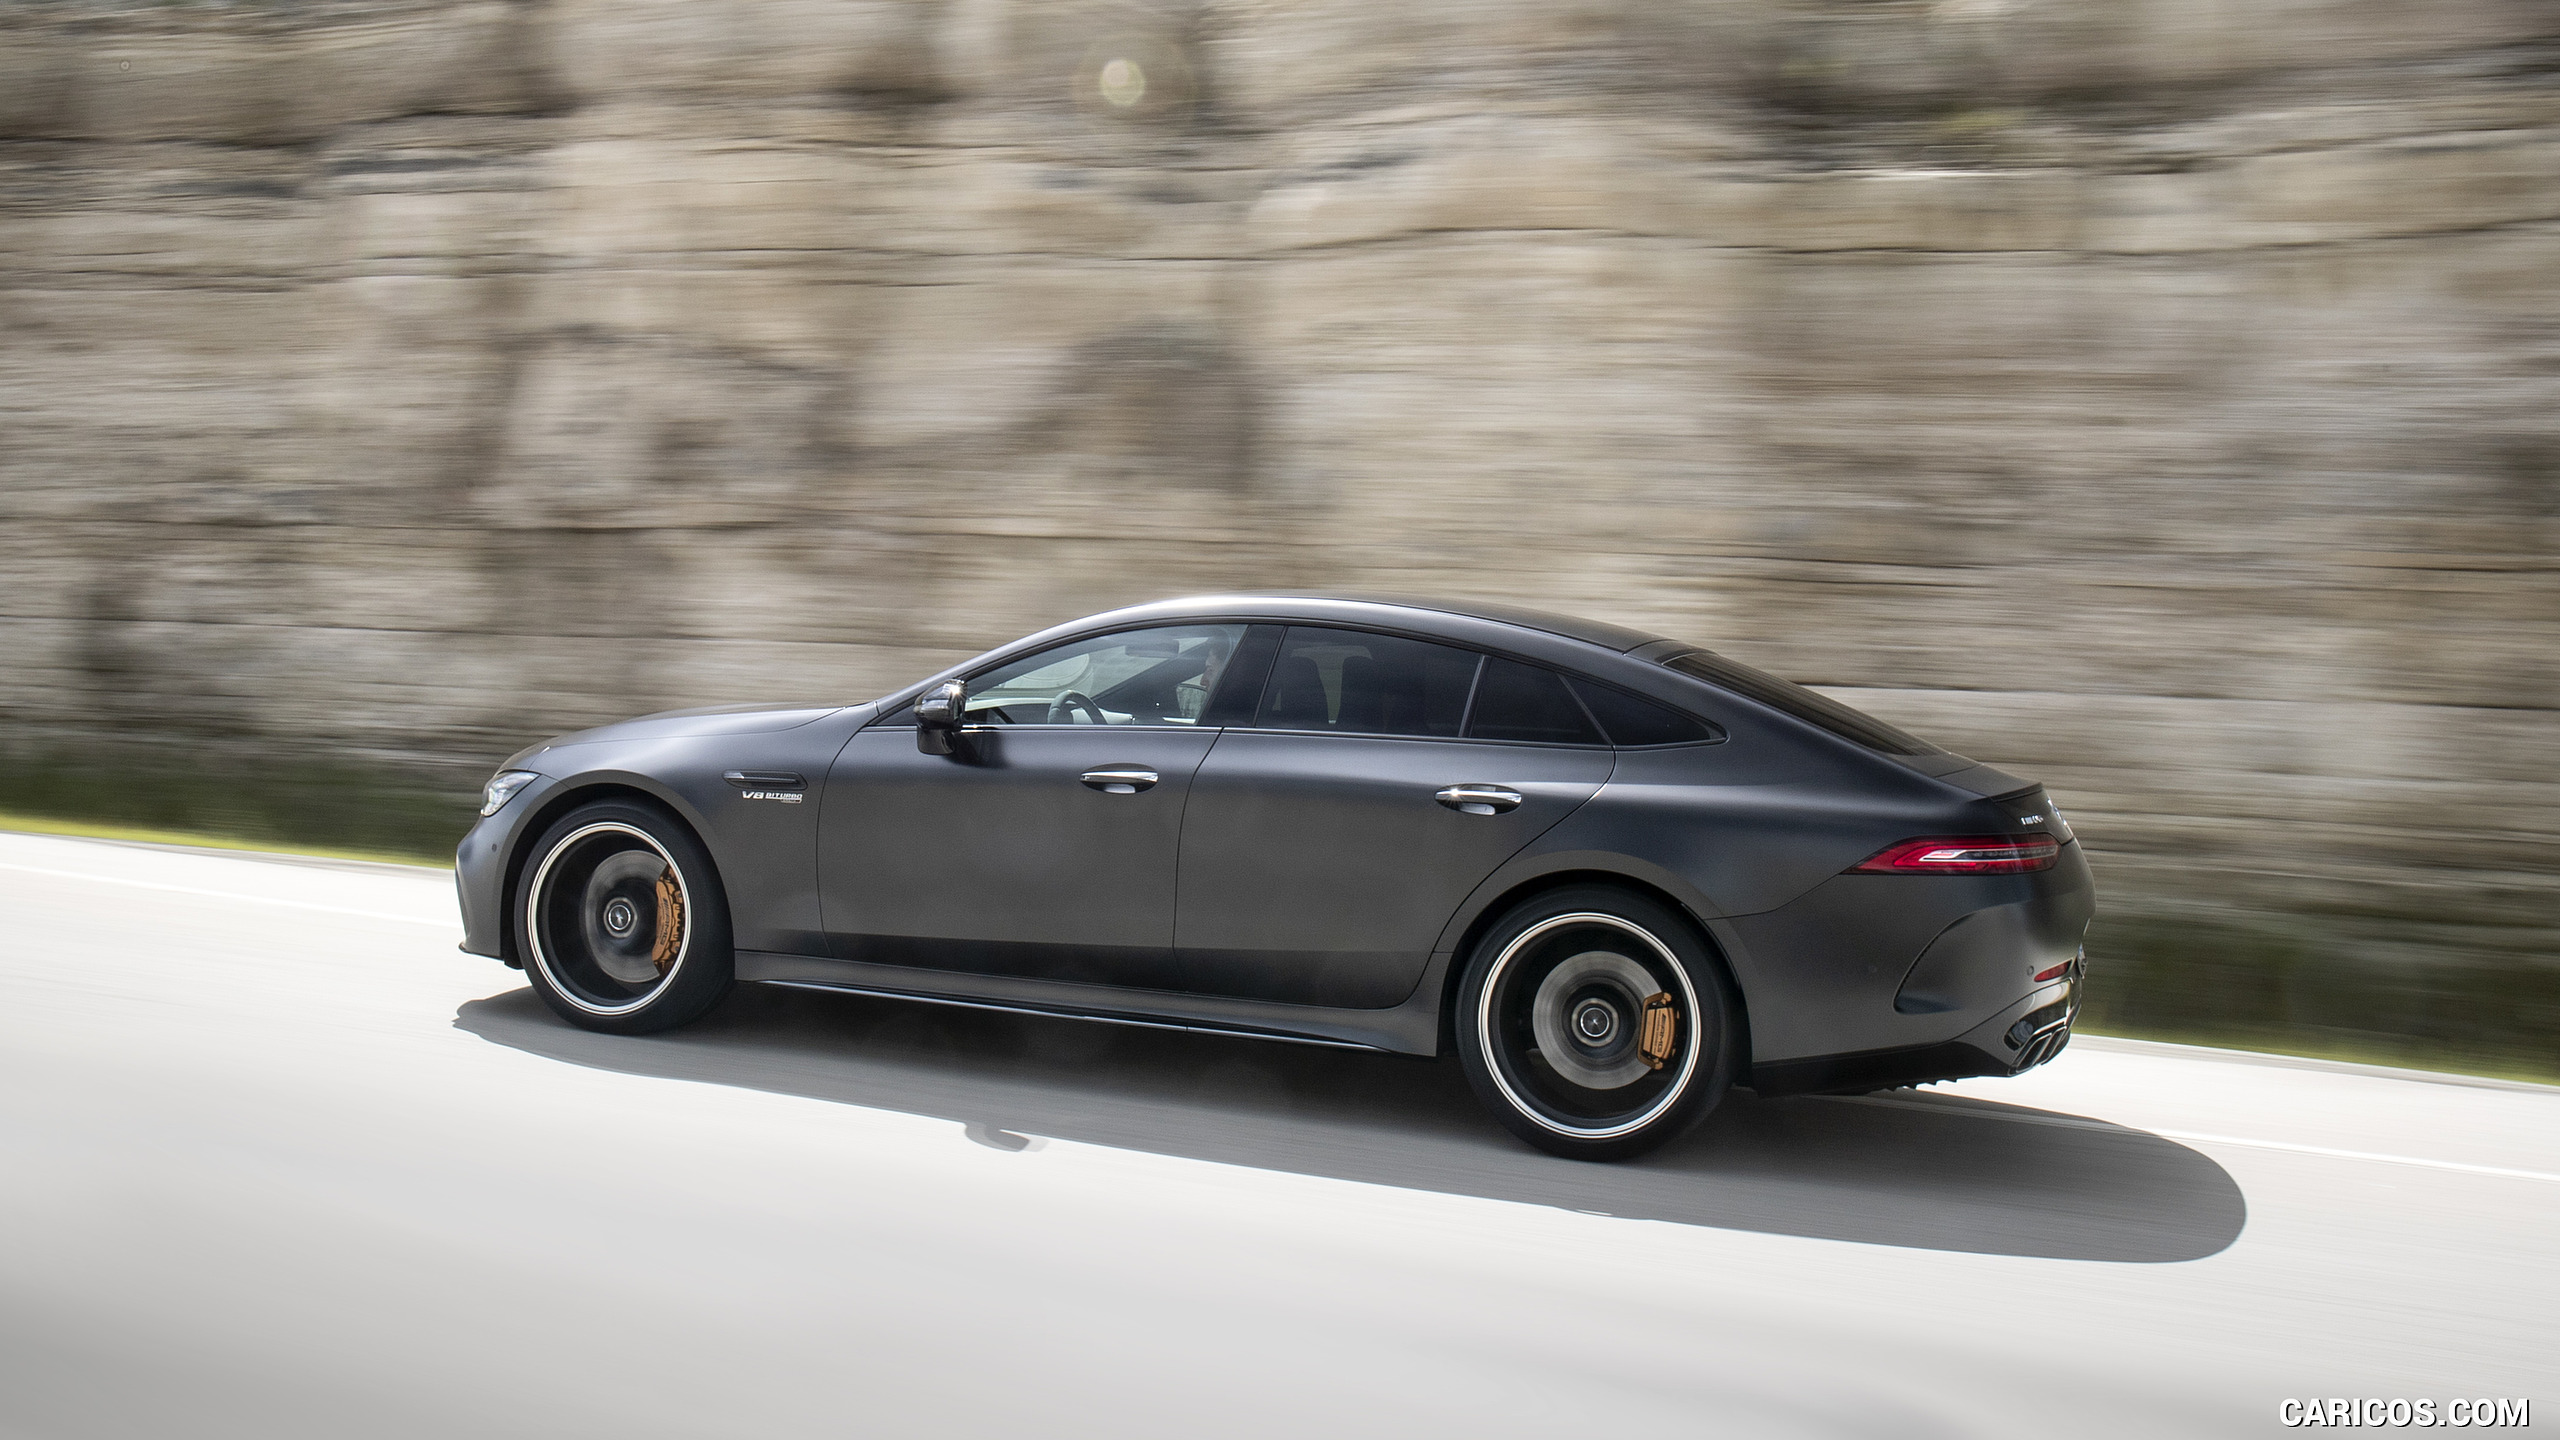 2019 Mercedes-AMG GT 63 S 4MATIC+ 4-Door Coupe - Side, #194 of 427